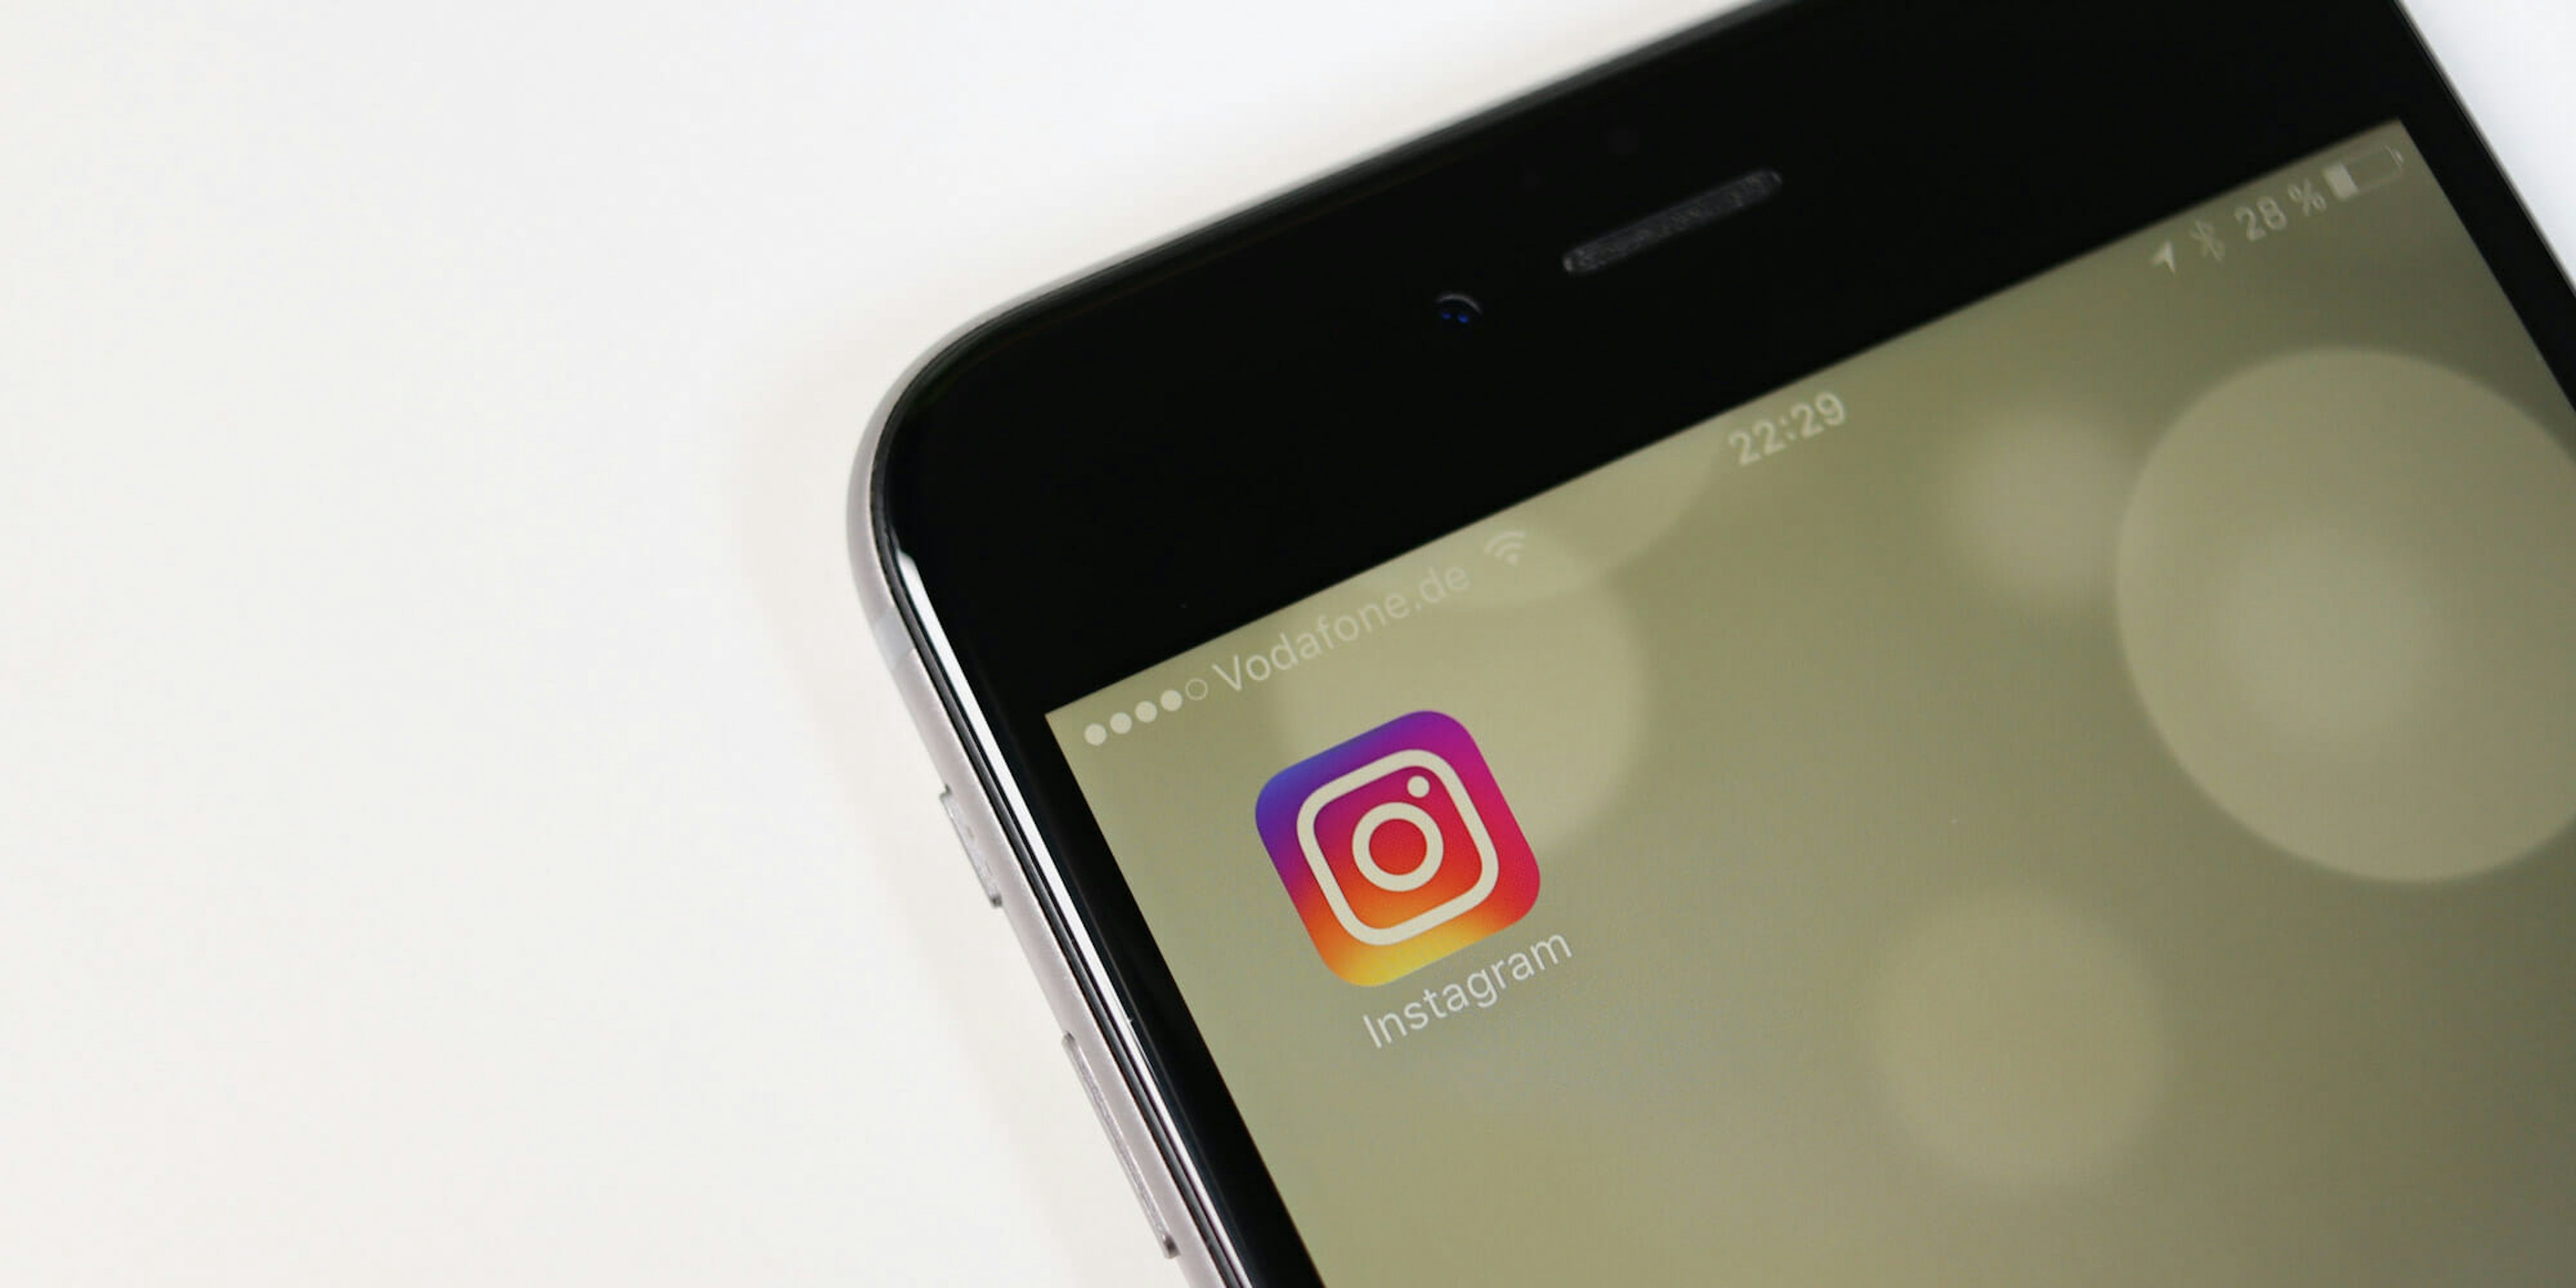 Personal data for millions of prominent Instagram users was found in an open database.